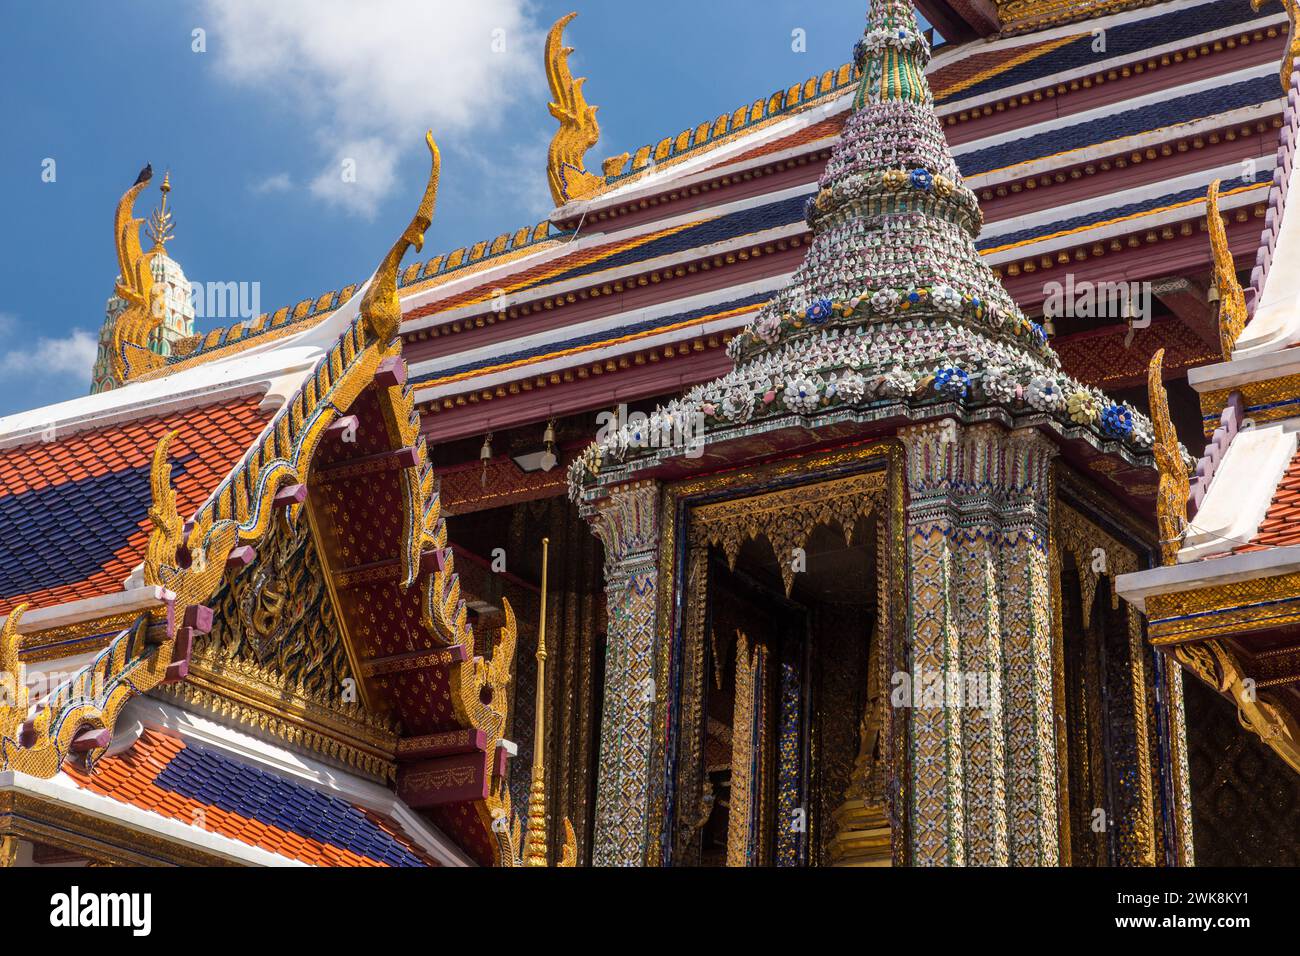 Ornately-decorated buildings around the Temple of the Emerald Buddha at the Grand Palace complex in Bangkok, Thailand. Stock Photo